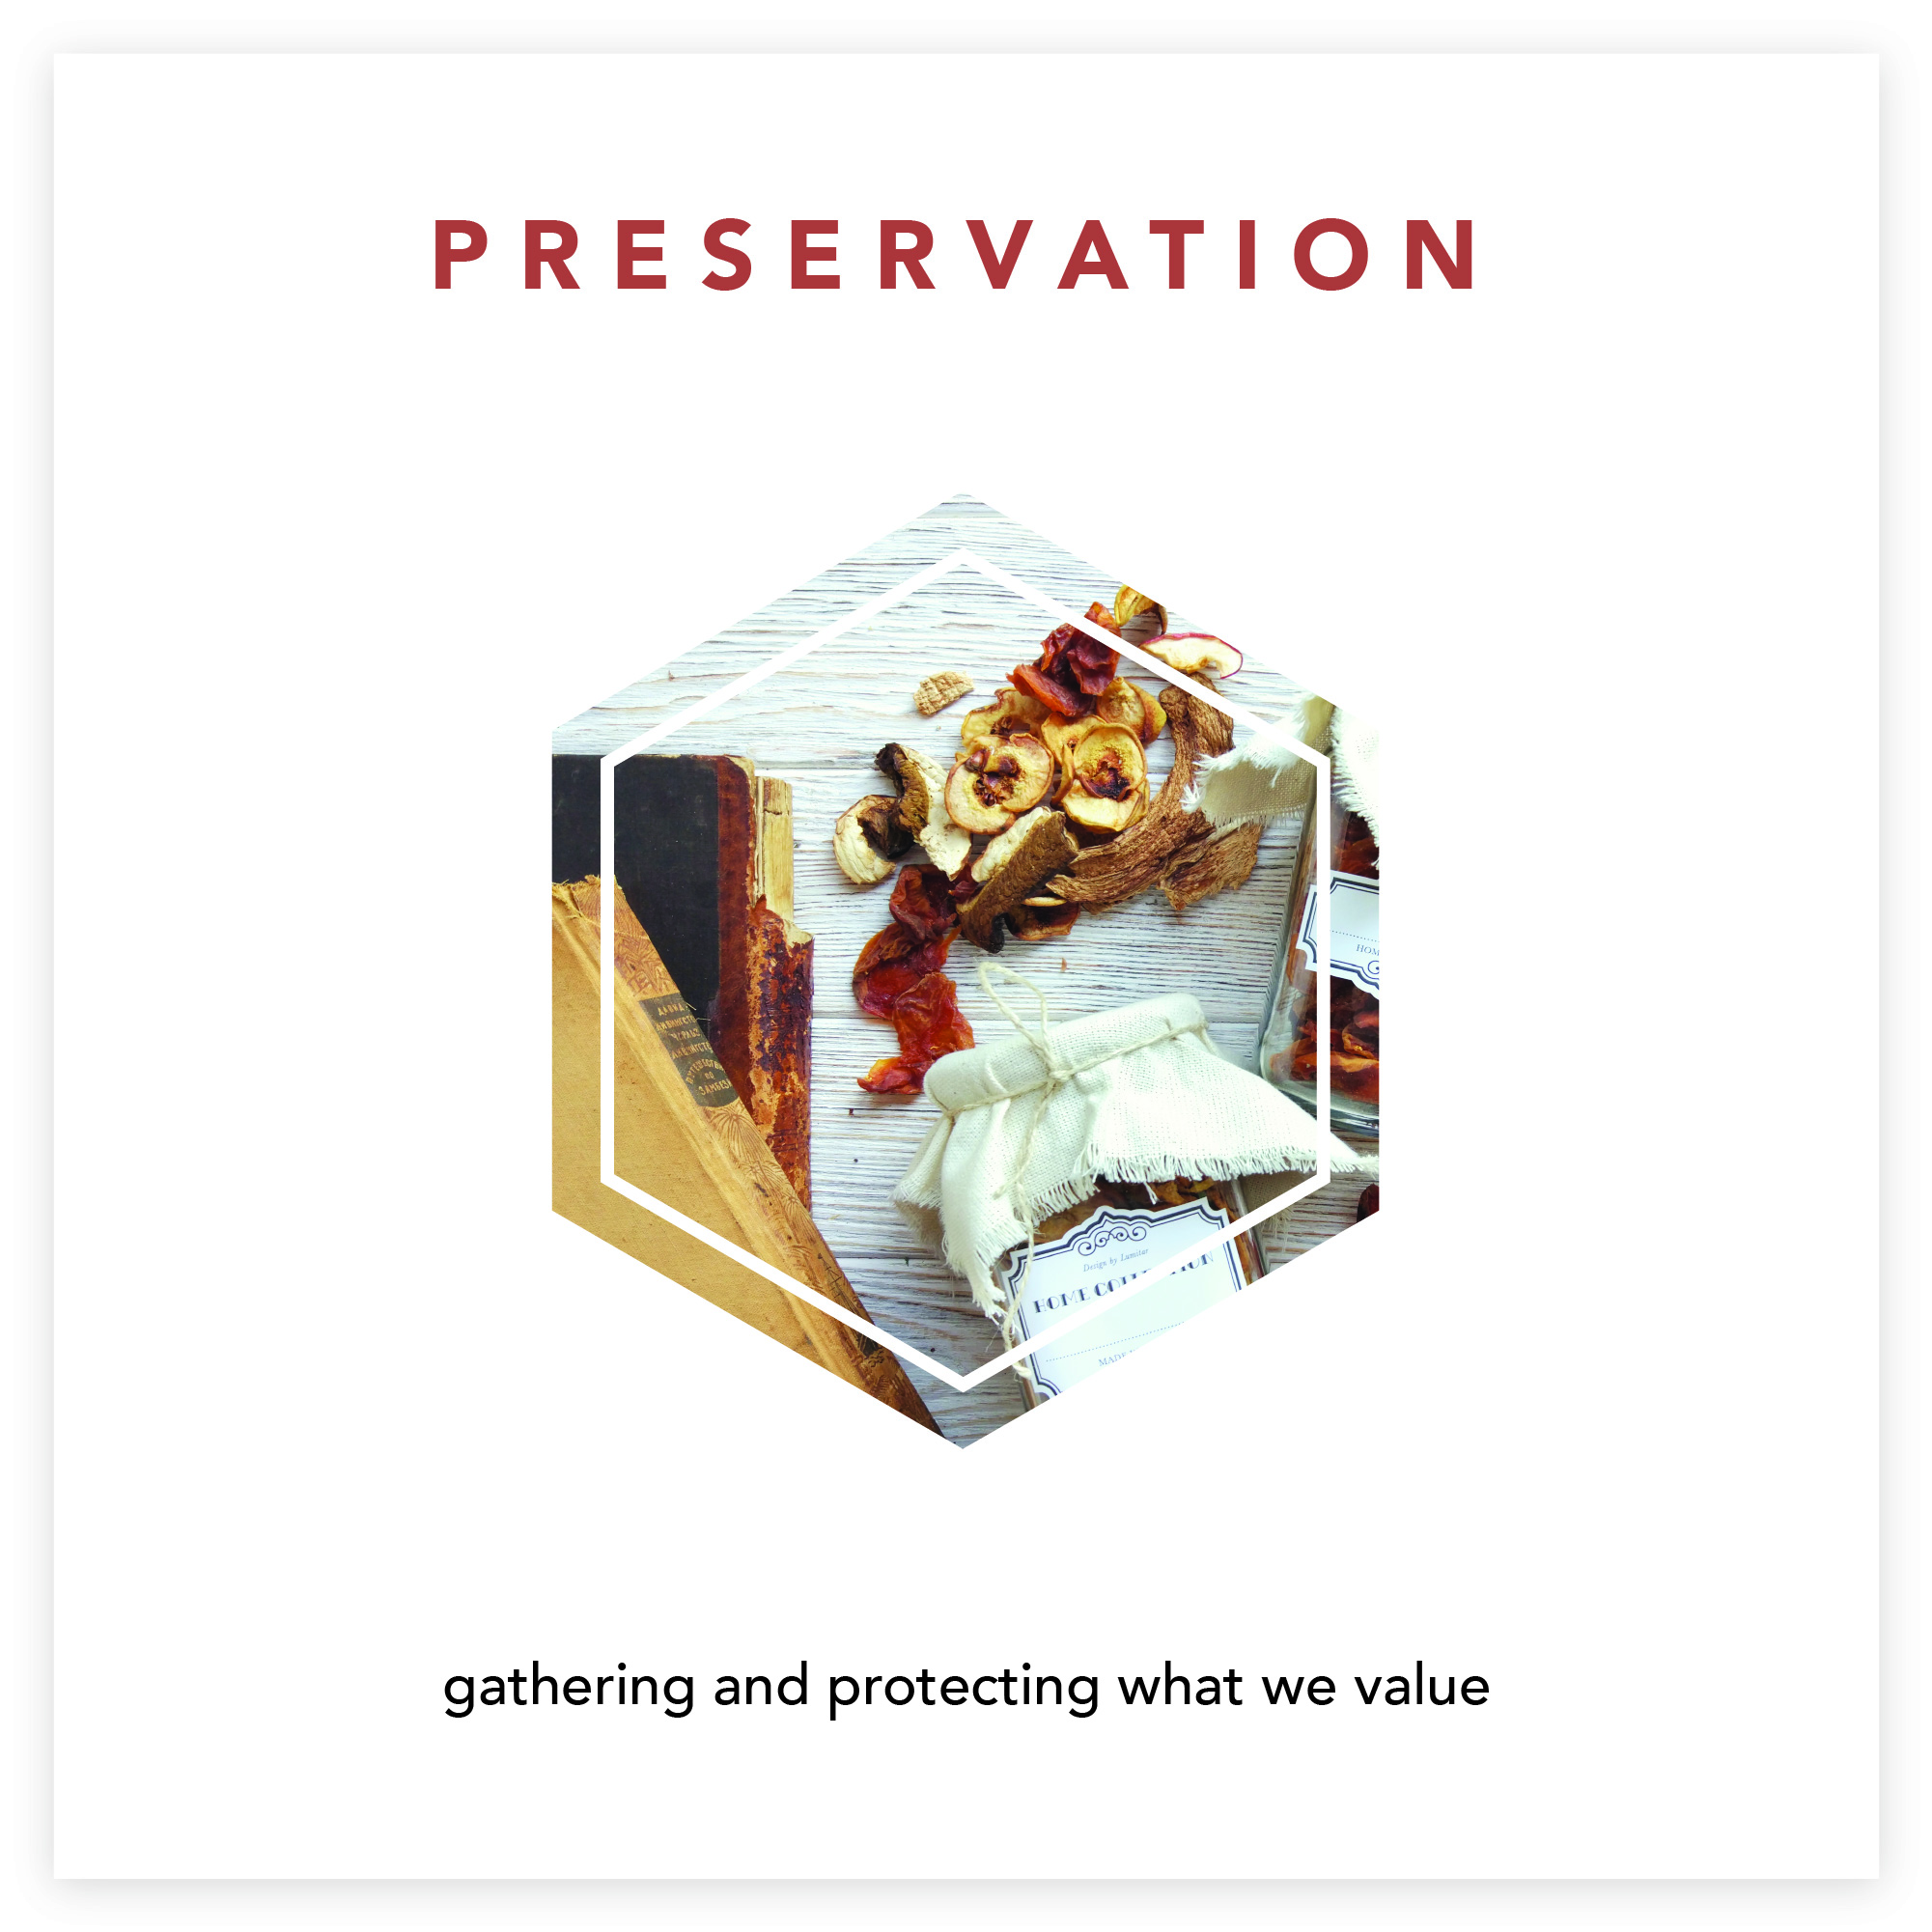 PRESERVATION - gathering and protecting what we value